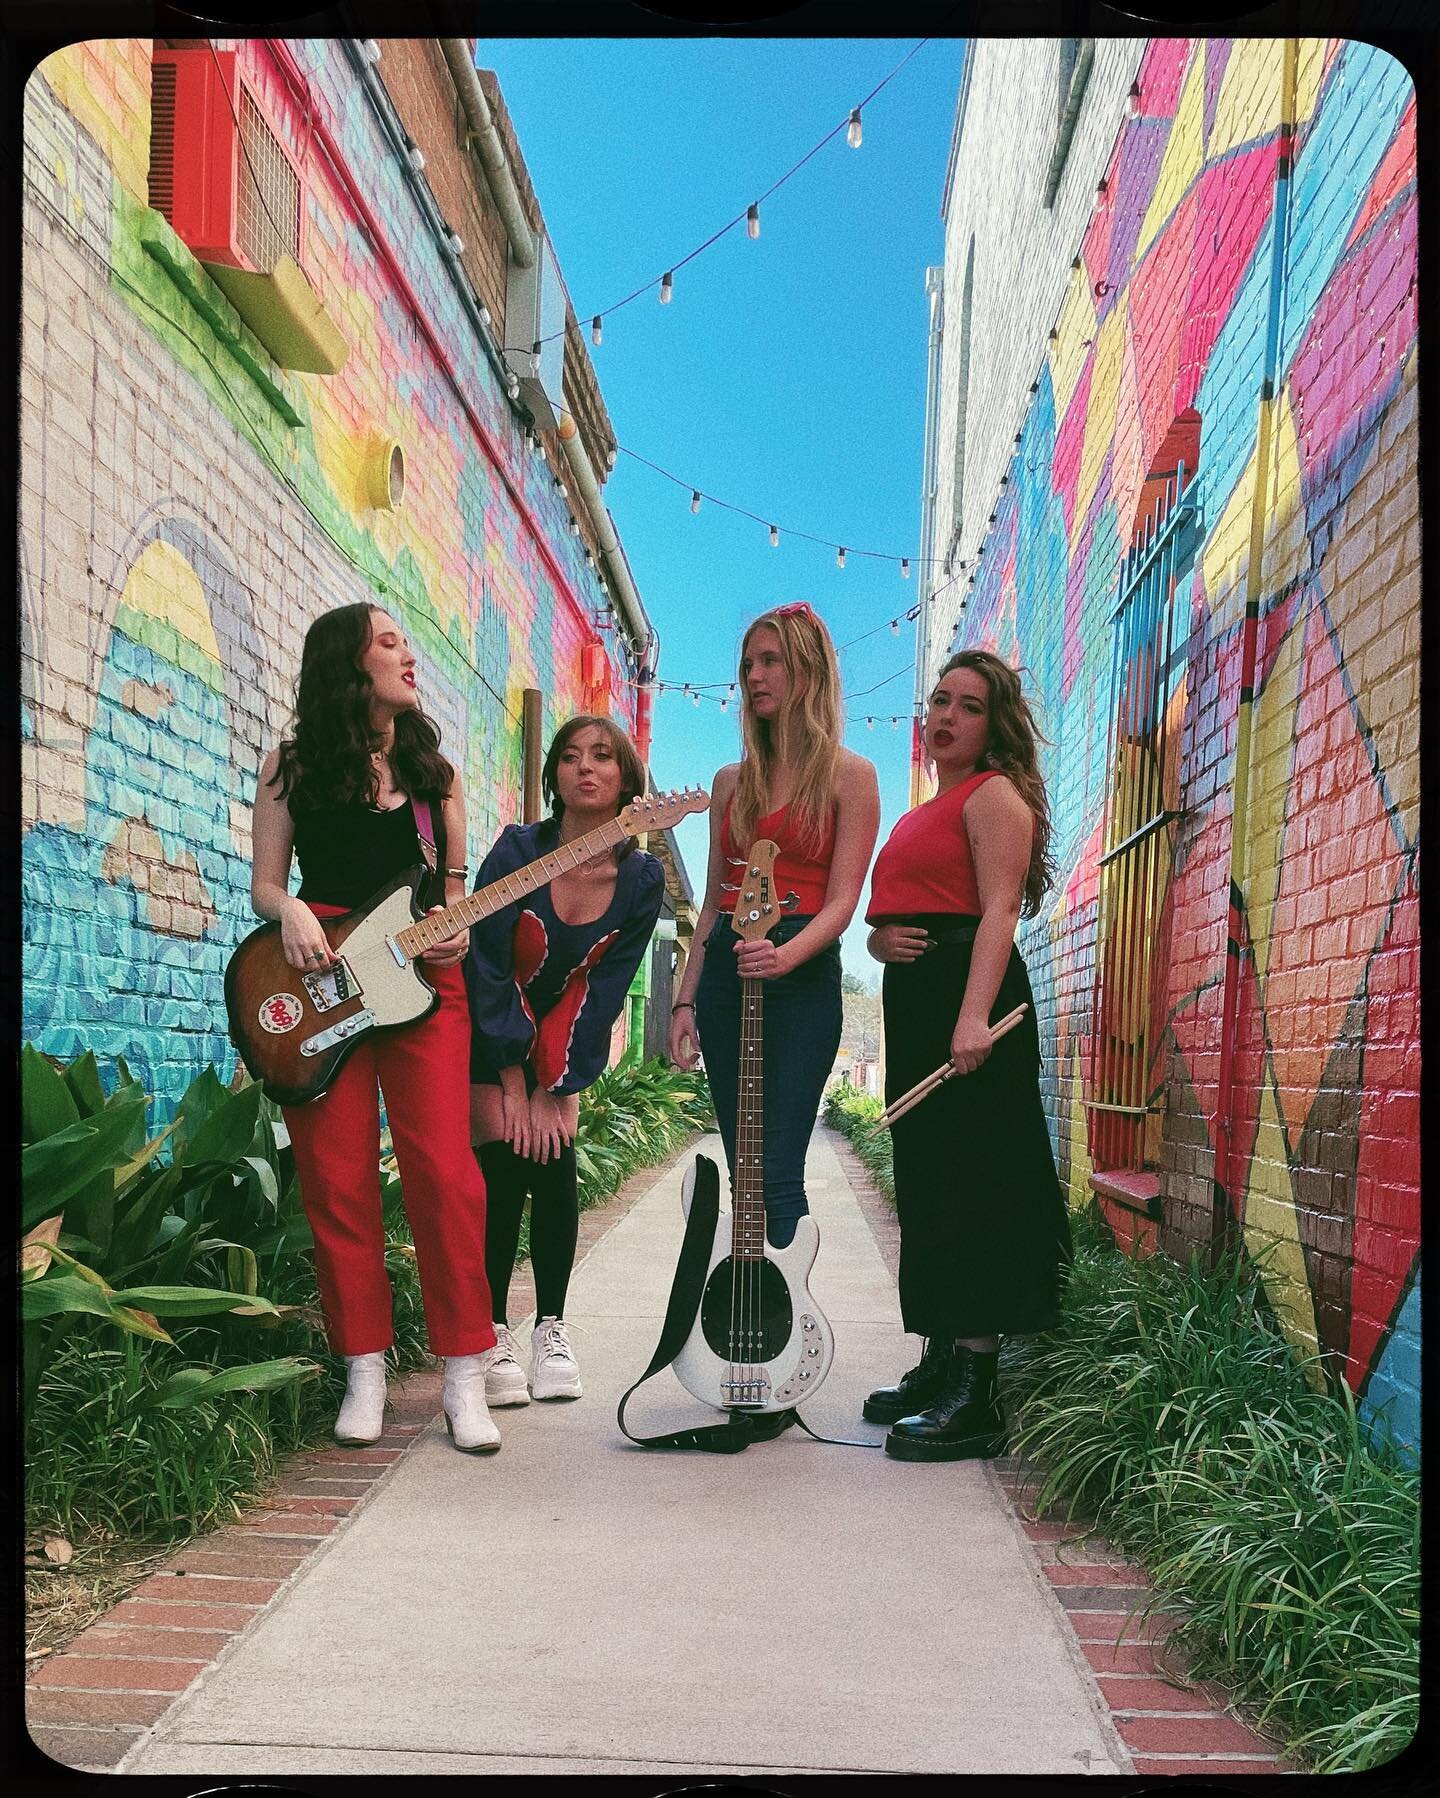 🦚CHARLOTTE!🦚
🕊NASHVILLE!🕊
❗️Swipe for deets &gt;&gt;&gt;
All of us ~goofy girlz~ are super excited to come play for our Charlotte friends on Friday May 20th at The Hobbyist with Sol Siesta! 🤗💫
Then, on Saturday June 11th we&rsquo;ll be taking a